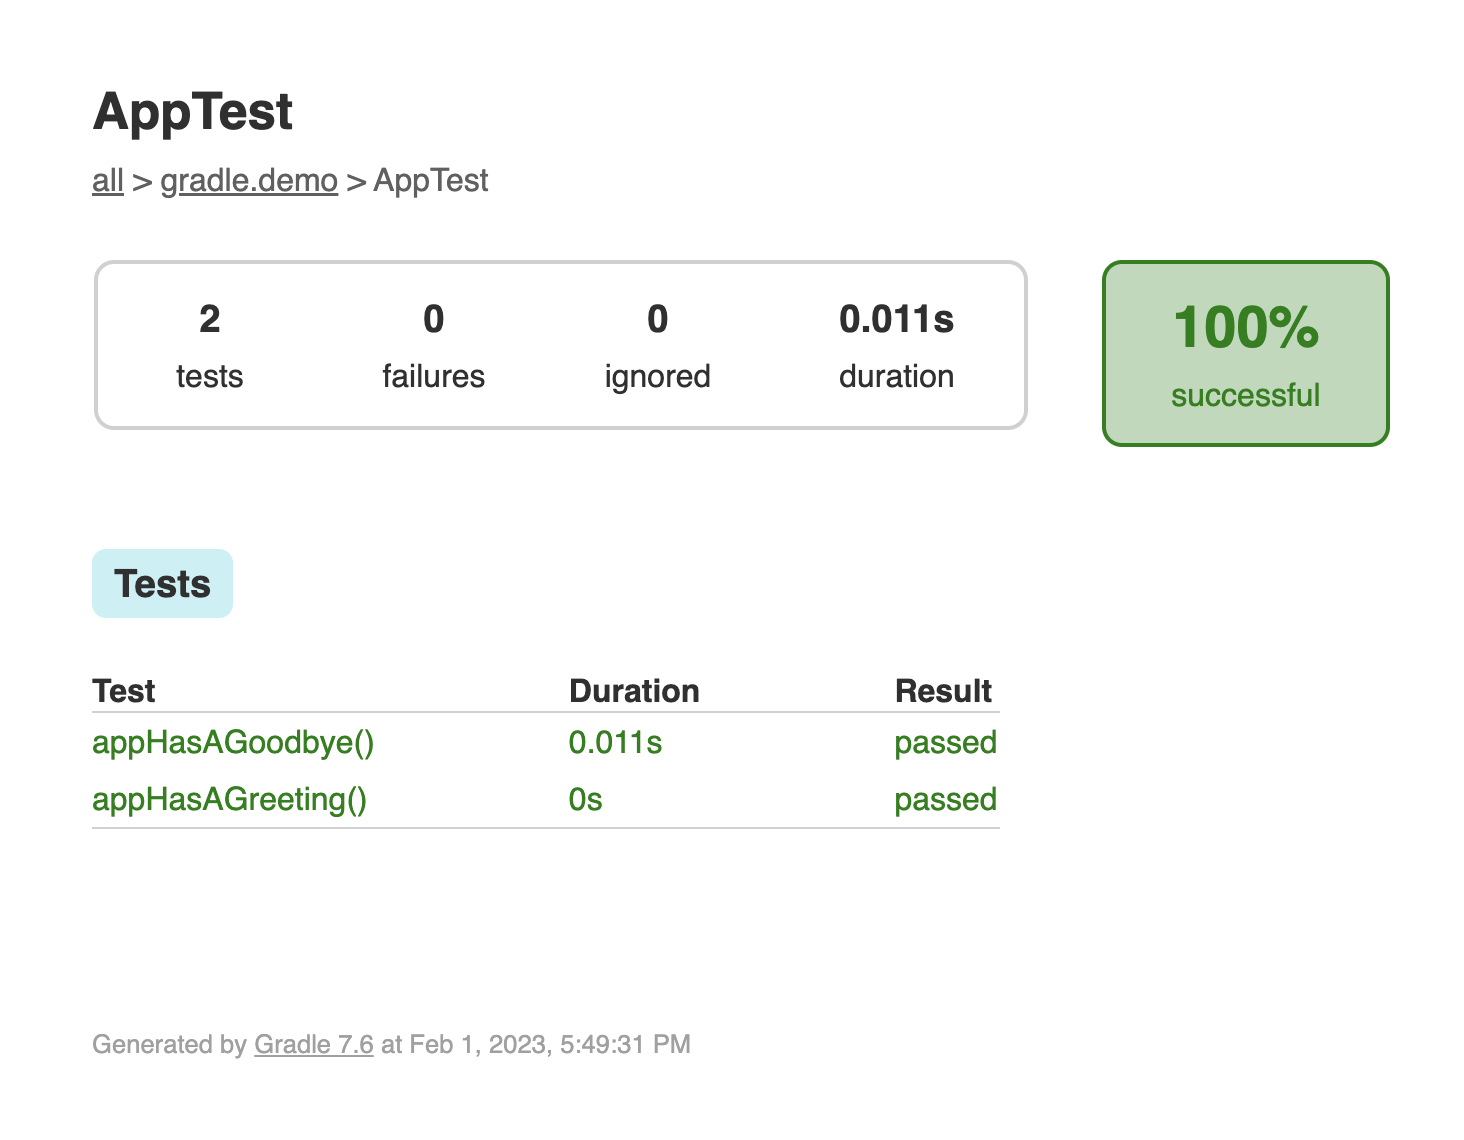 The detailed test report generated by Gradle